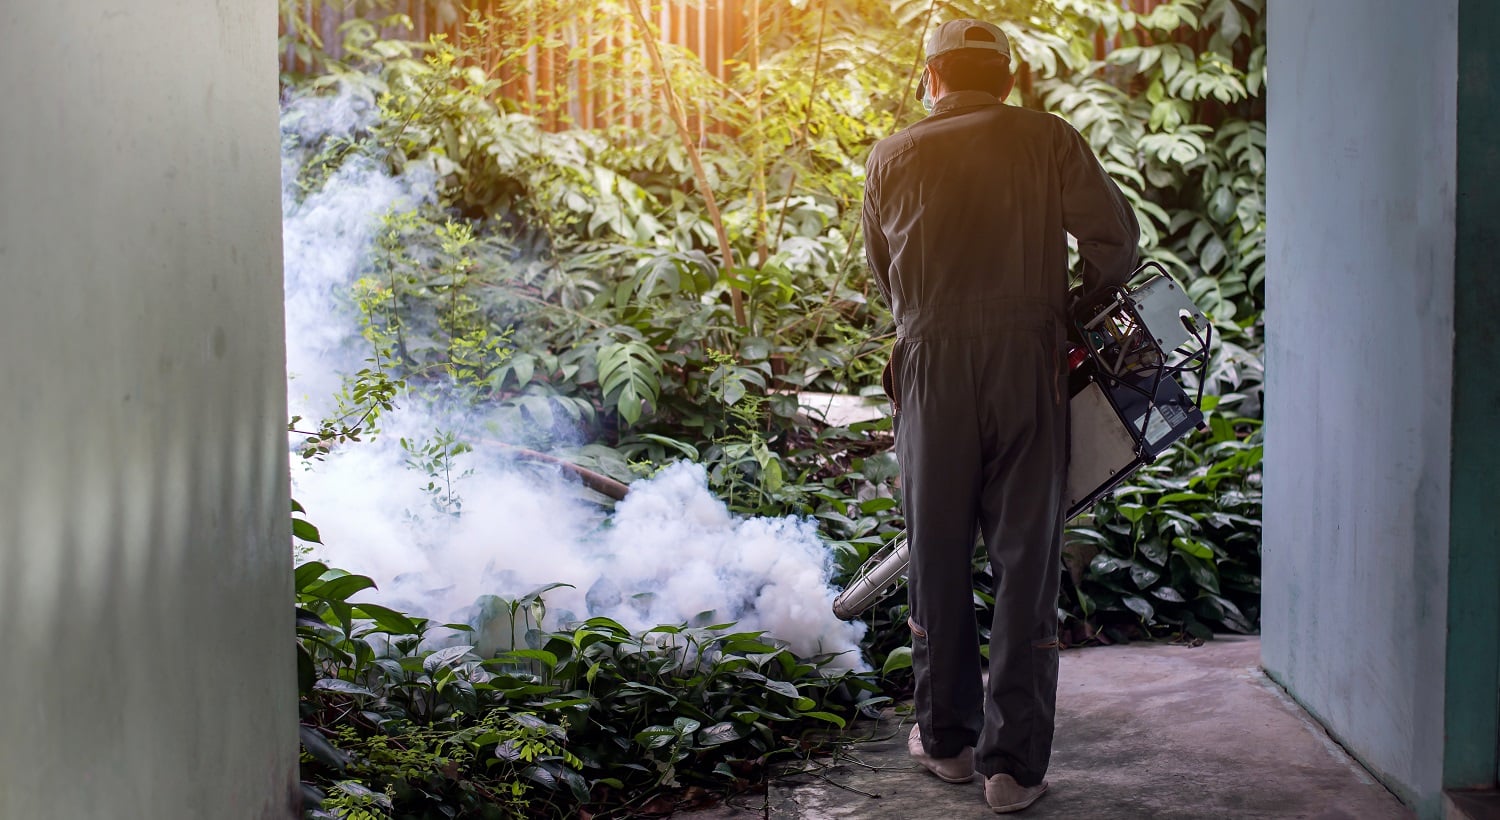 Man work fogging to eliminate mosquito for preventing spread dengue fever and zika virus